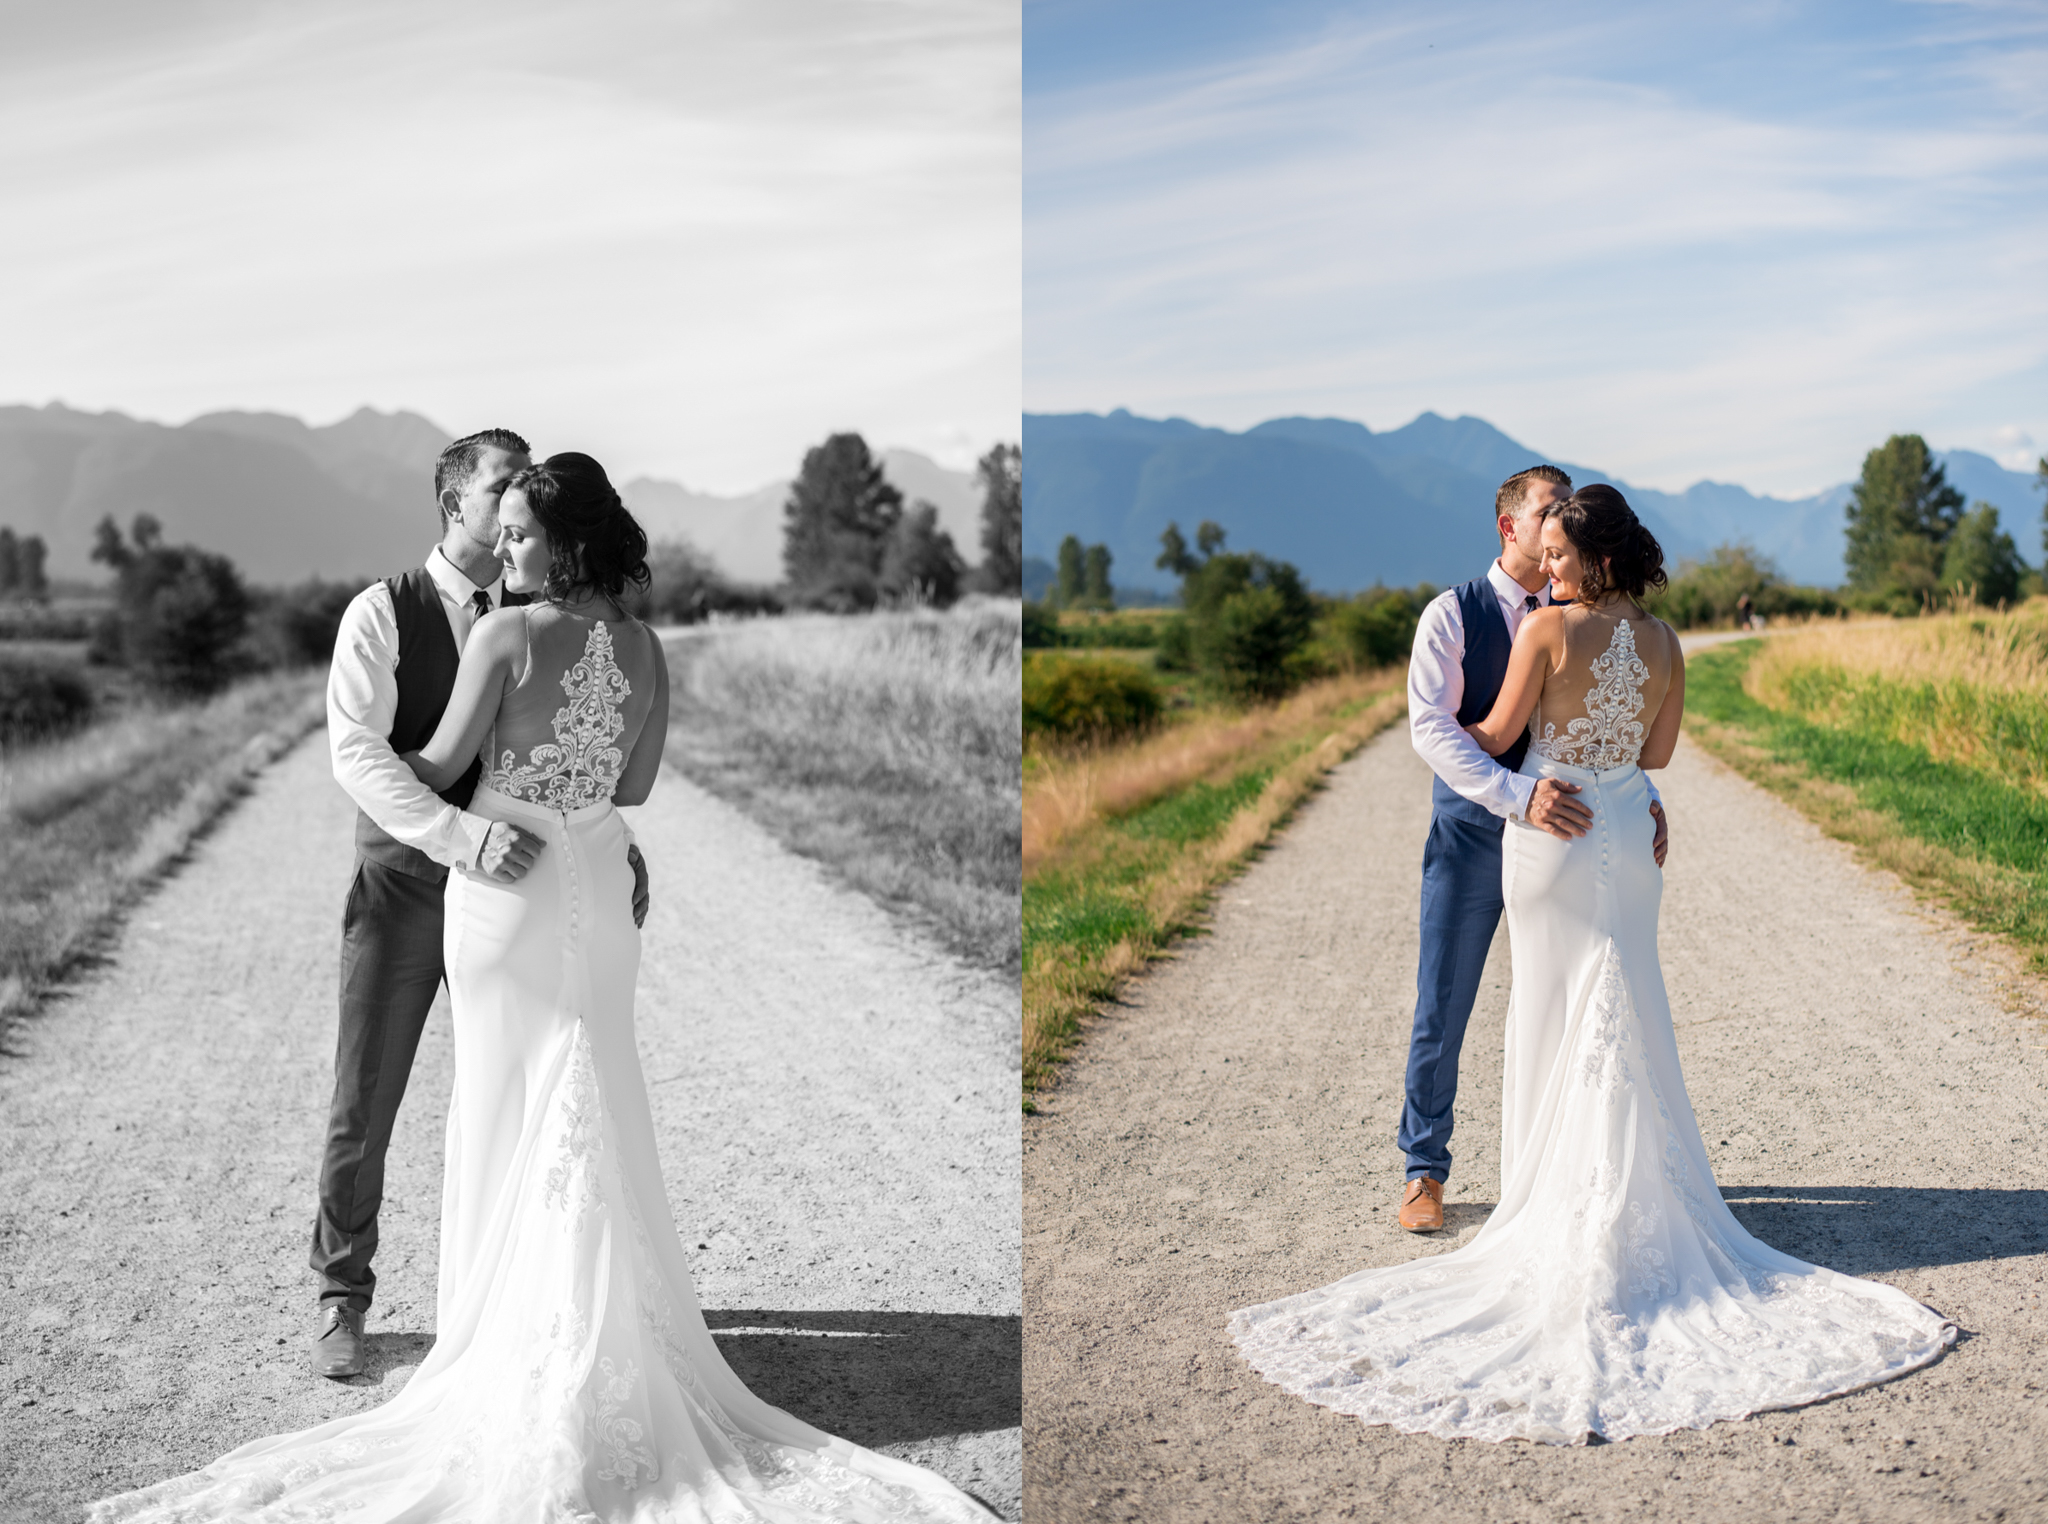 Bride and Groom embracing in Jerry Sulina Park, Maple Ridge, BC